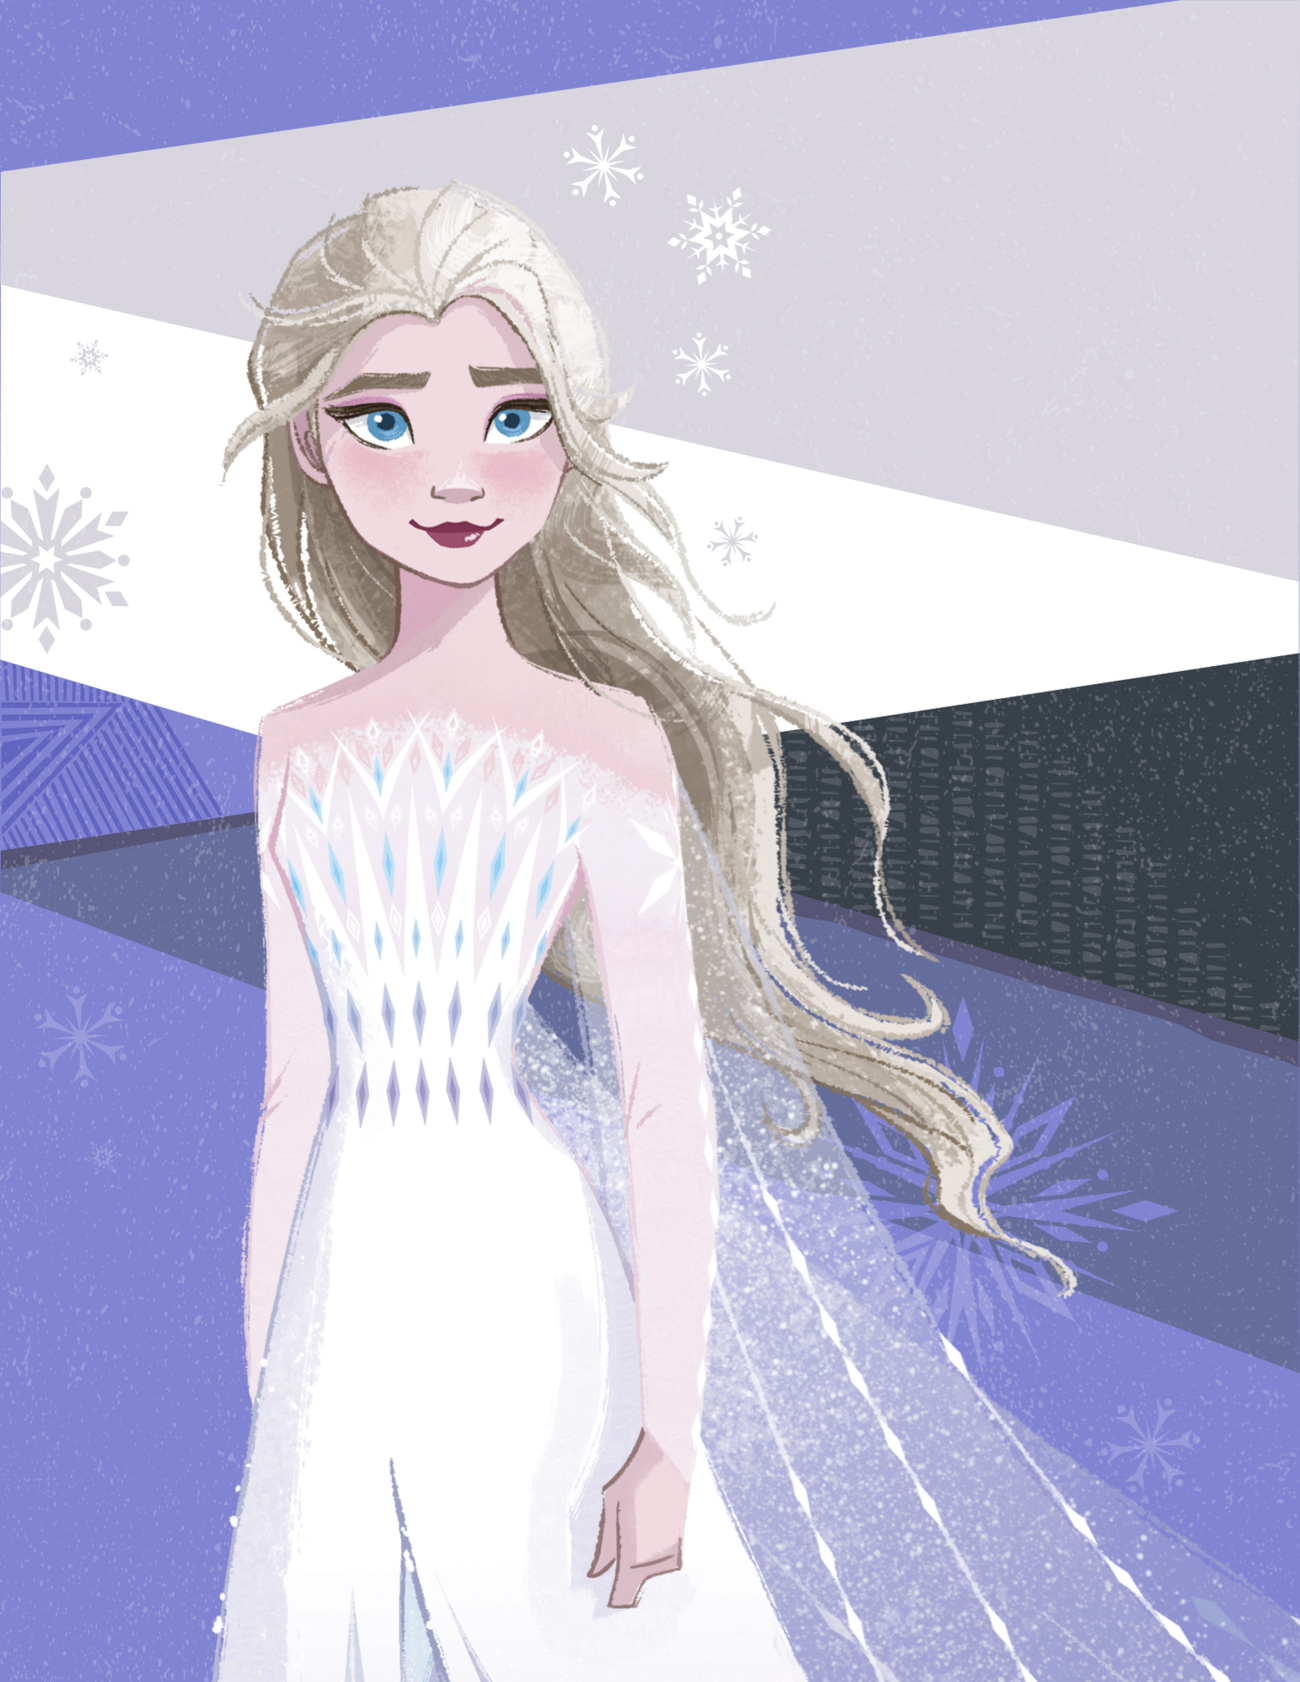 Frozen 2 Elsa In White Dress With Hair Down New Official Big Images 